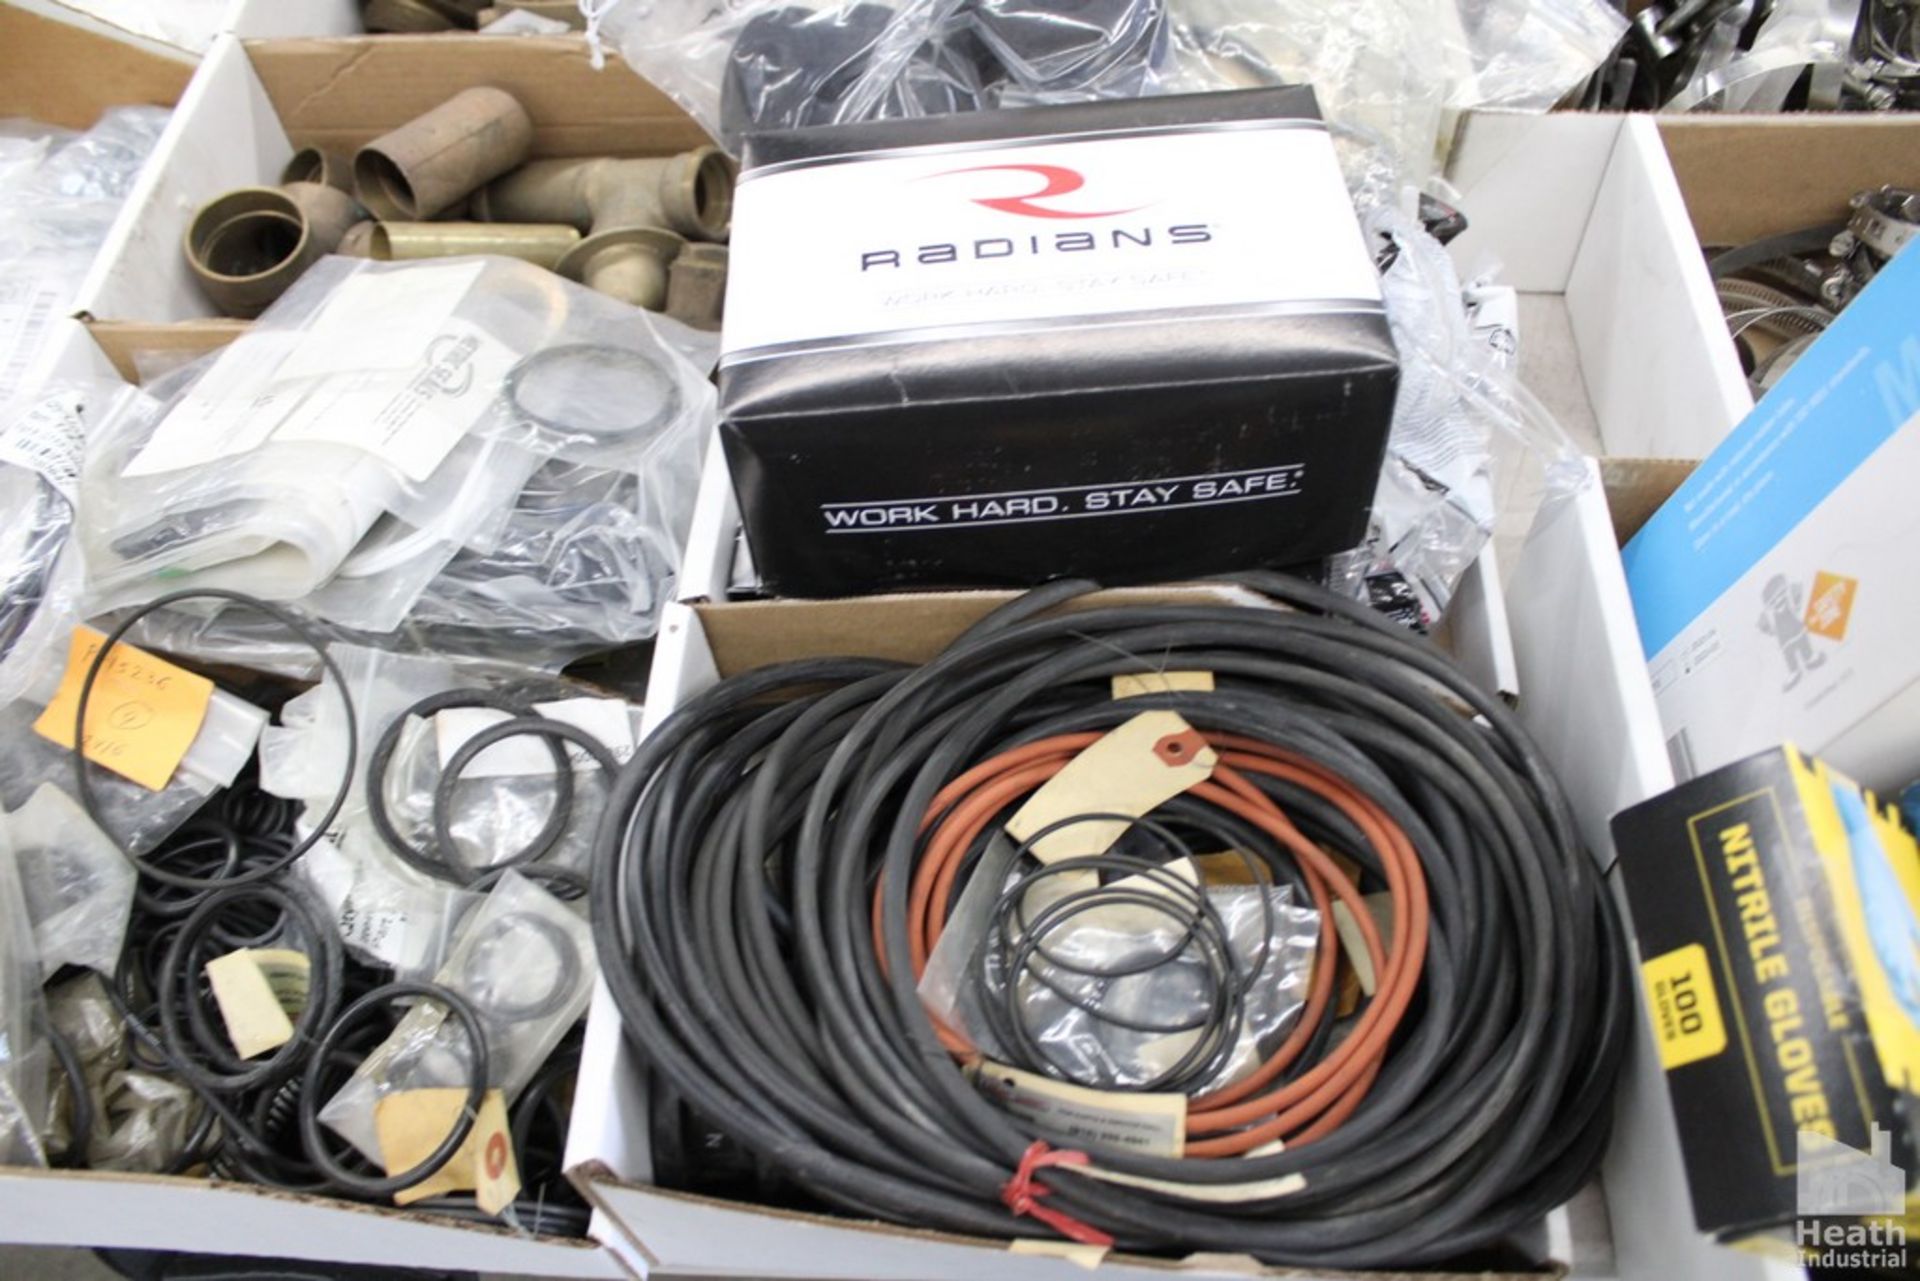 LARGE QUANTITY OF O-RINGS AND SAFETY GLASSES IN FOUR BOXES - Image 3 of 3